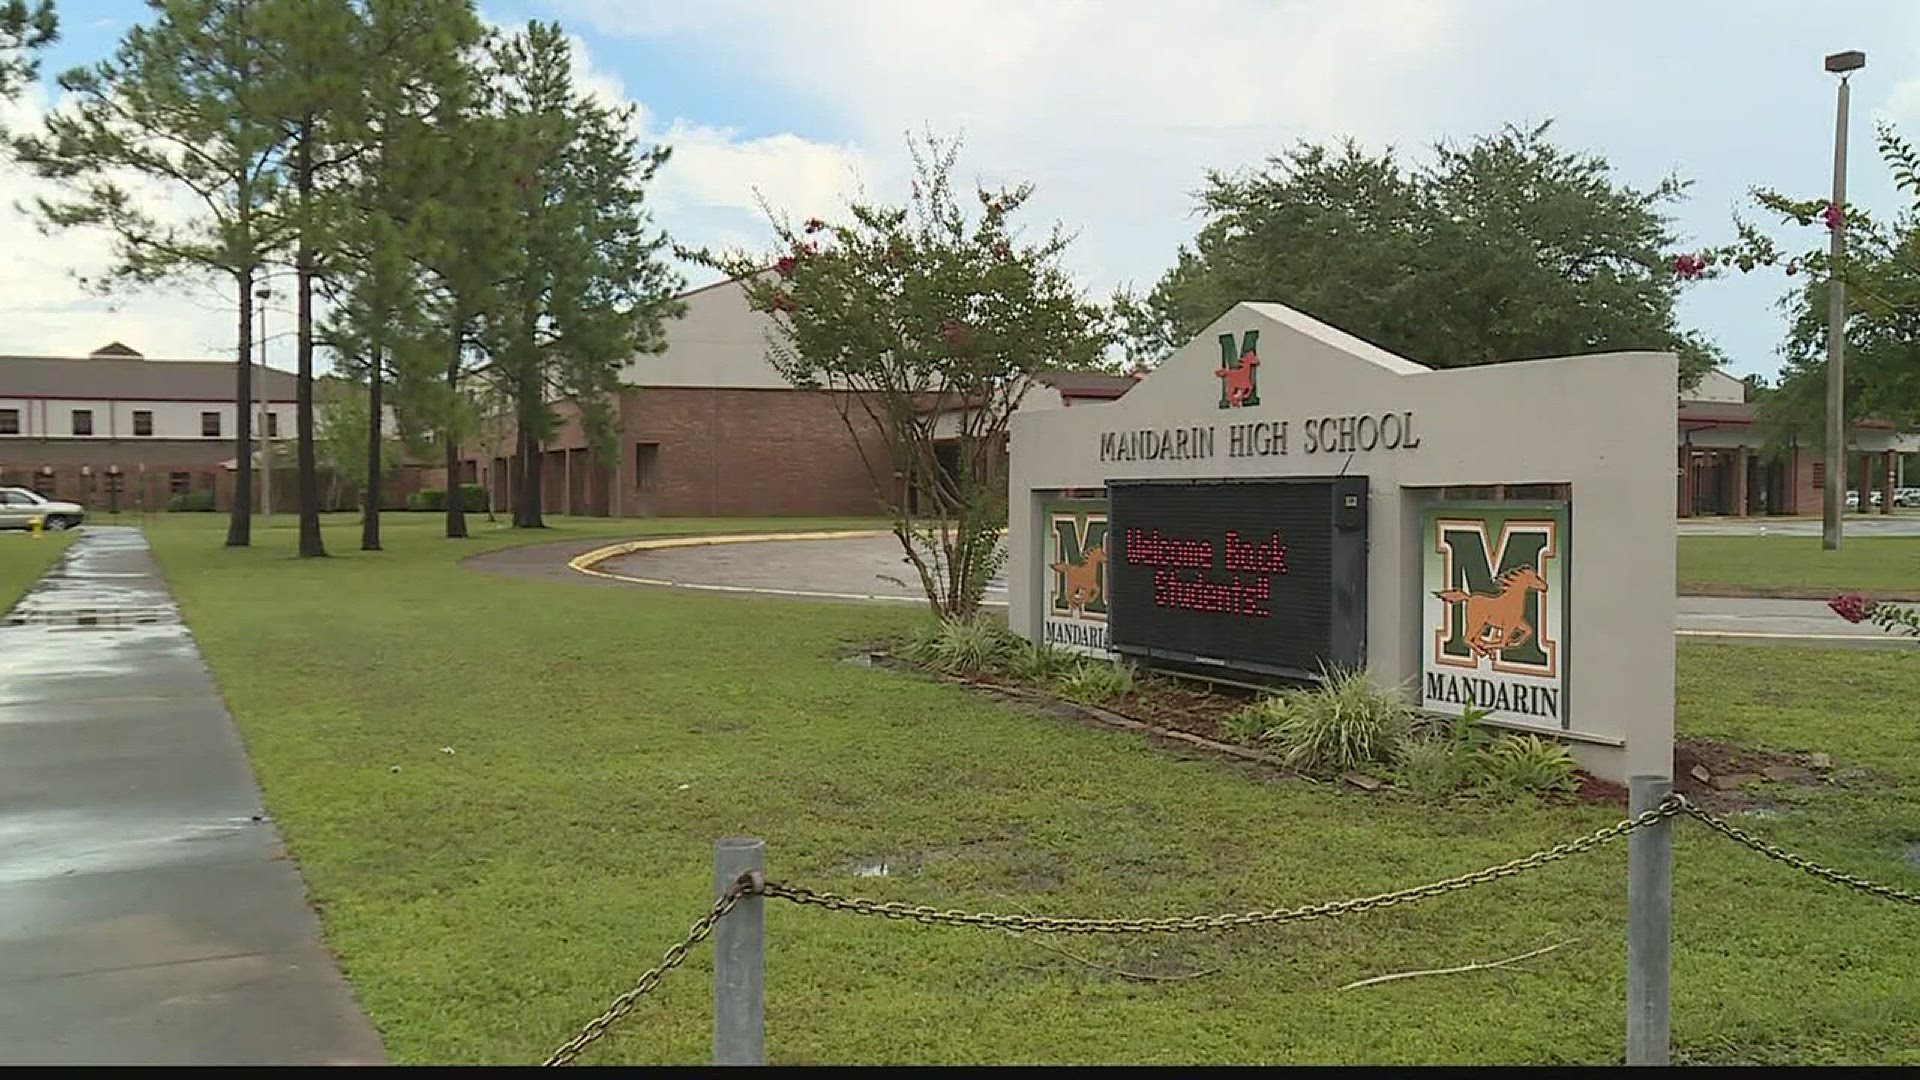 A 14-year-old student was accepted into a Medical Academy program in June at Mandarin High School. But the school said the student can't attend the program.